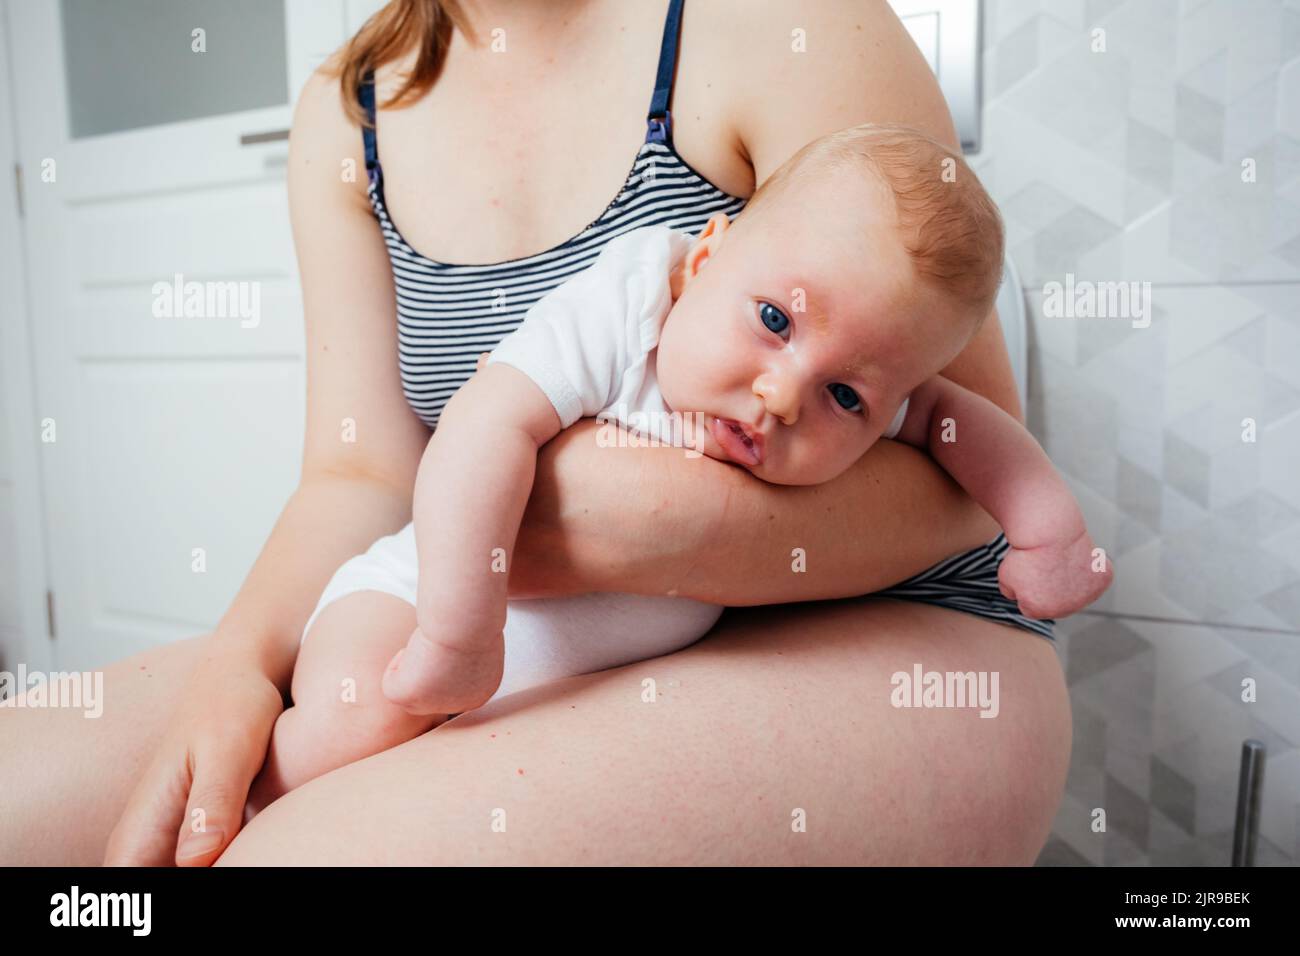 Tired depressed mother with crying newborn baby sitting on the lavatory pan Stock Photo